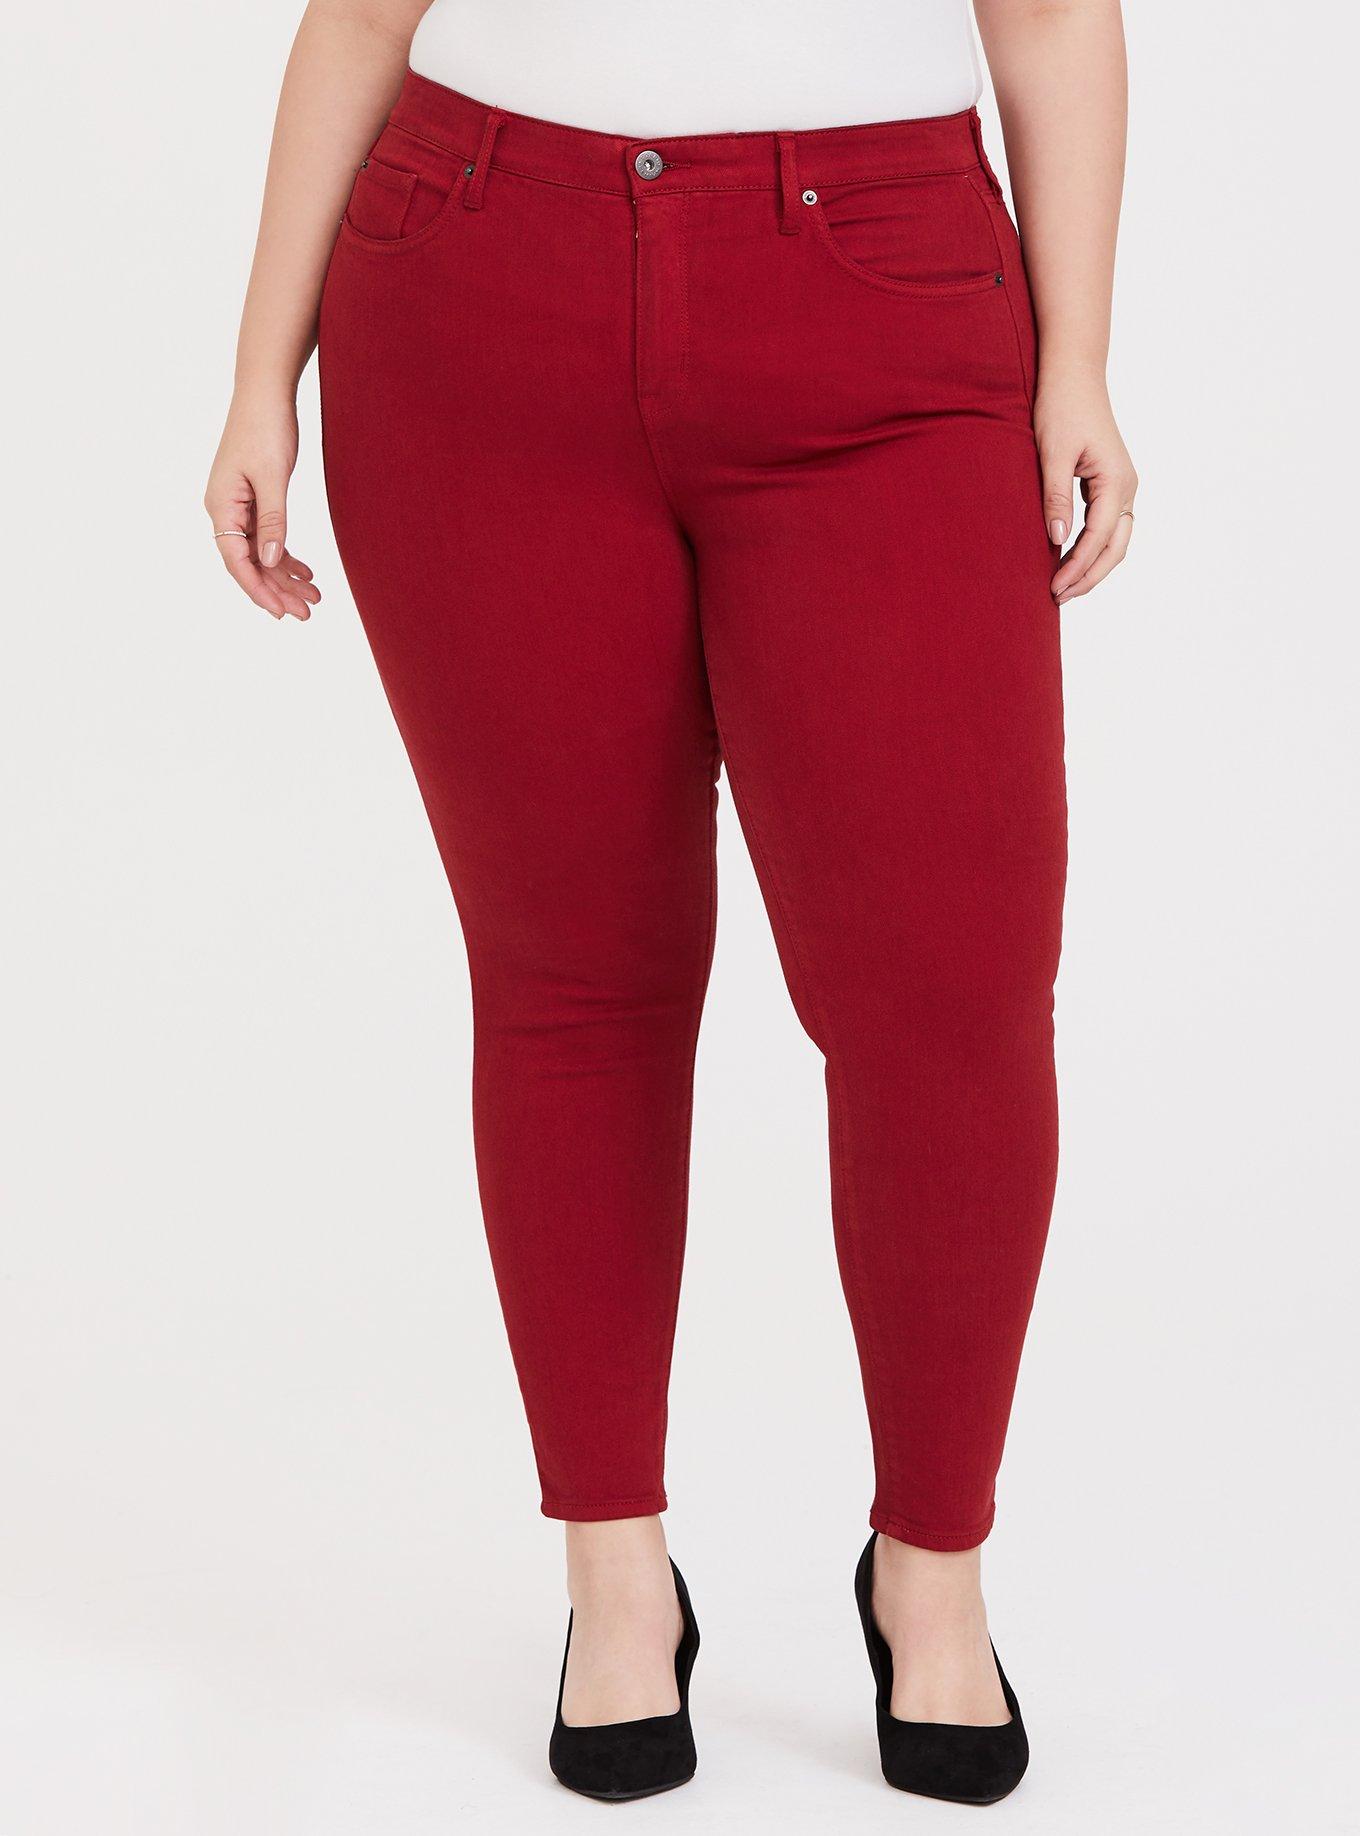 Red Jeans for Women, Red Skinny Jeans